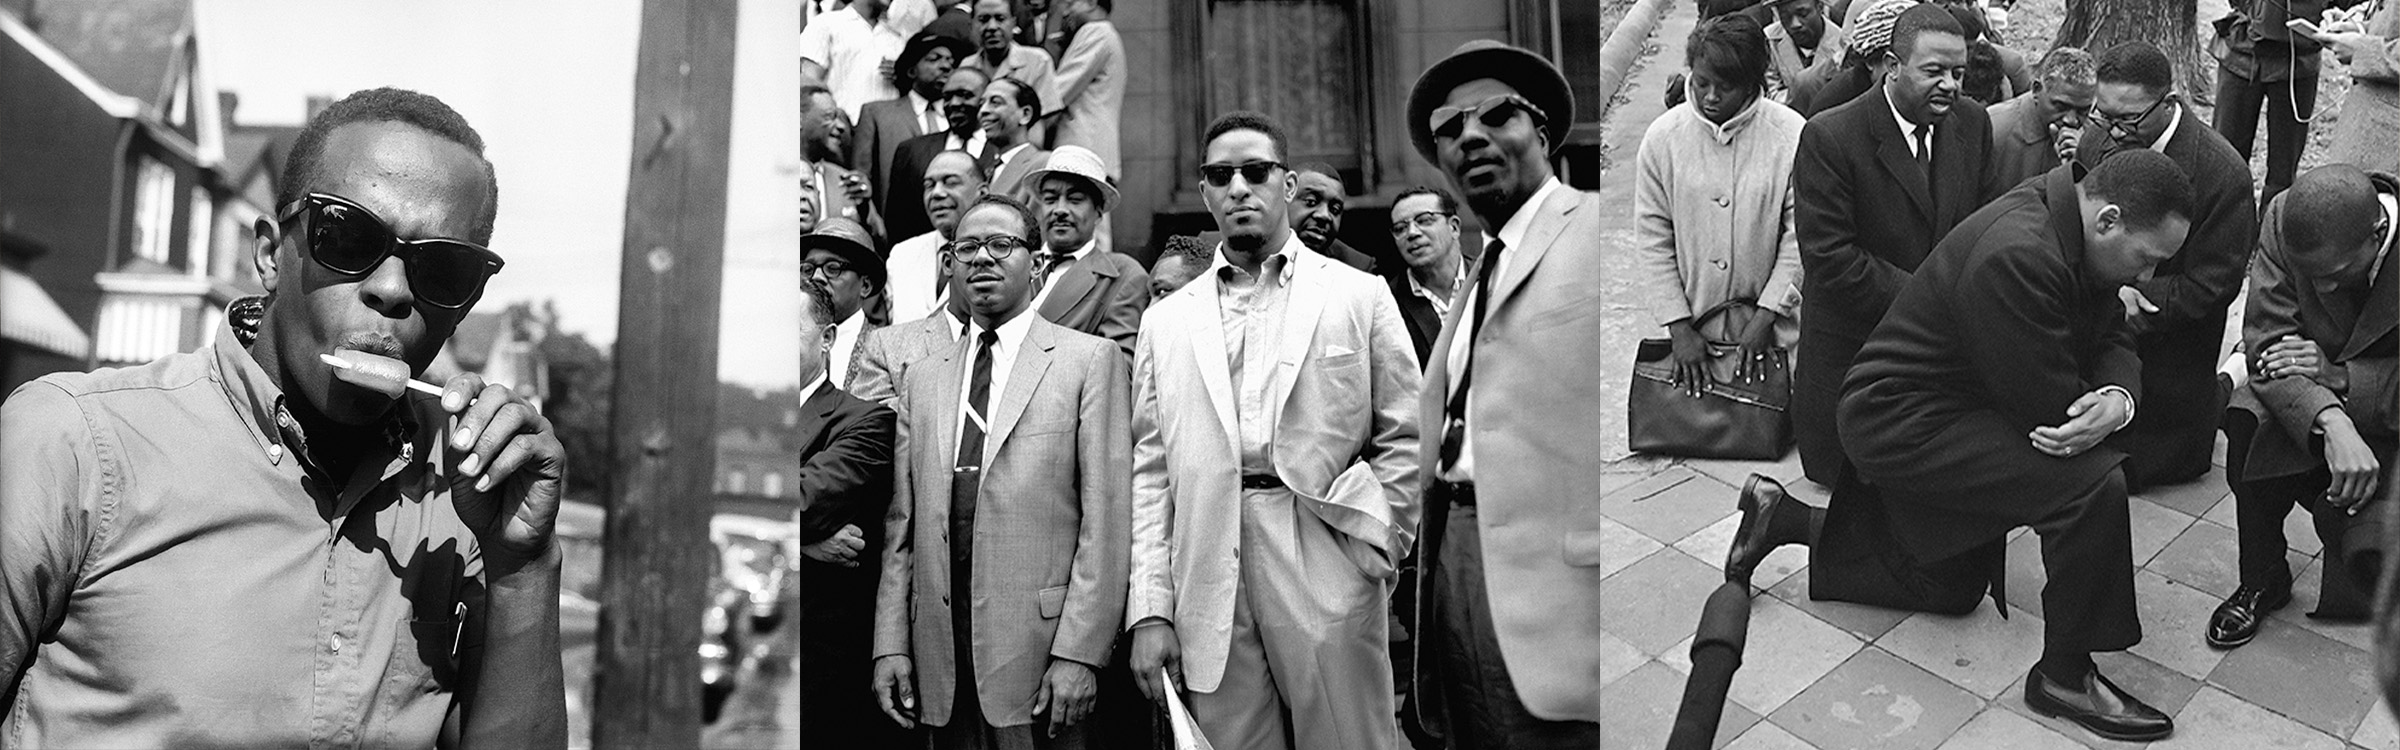 How Ivy Style Became One of the Civil Rights Movement's Most Powerful Weapons